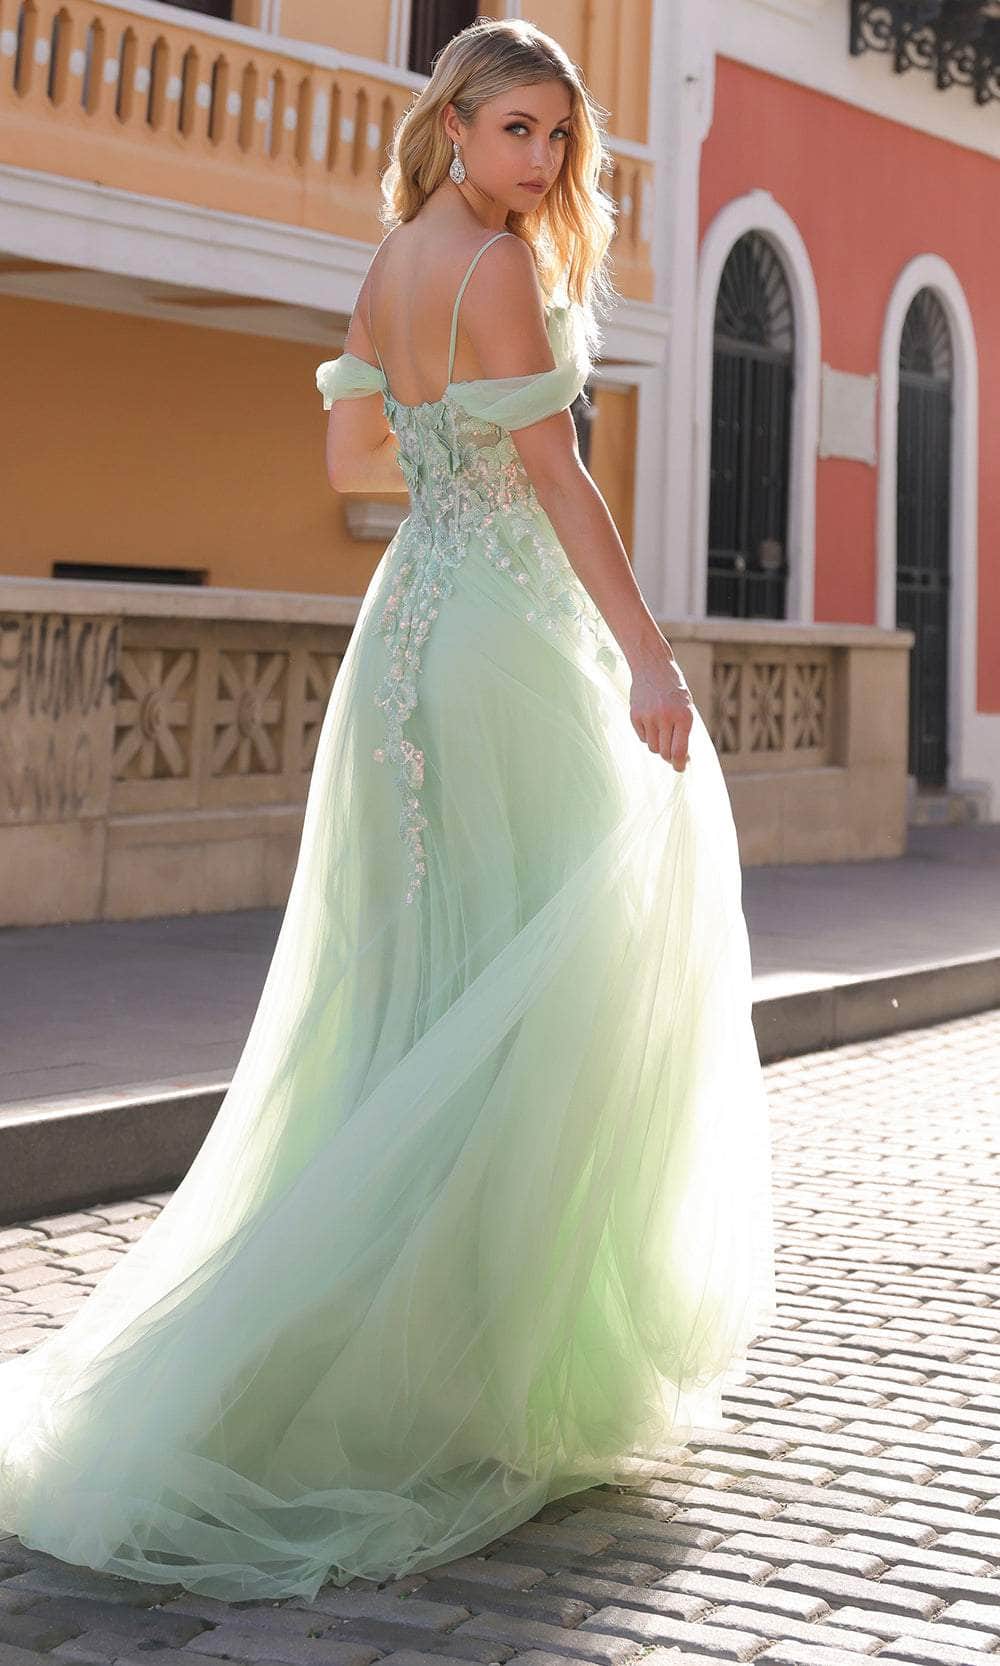 Nox Anabel J1324 - Sweetheart Embellished Gown Prom Gown 